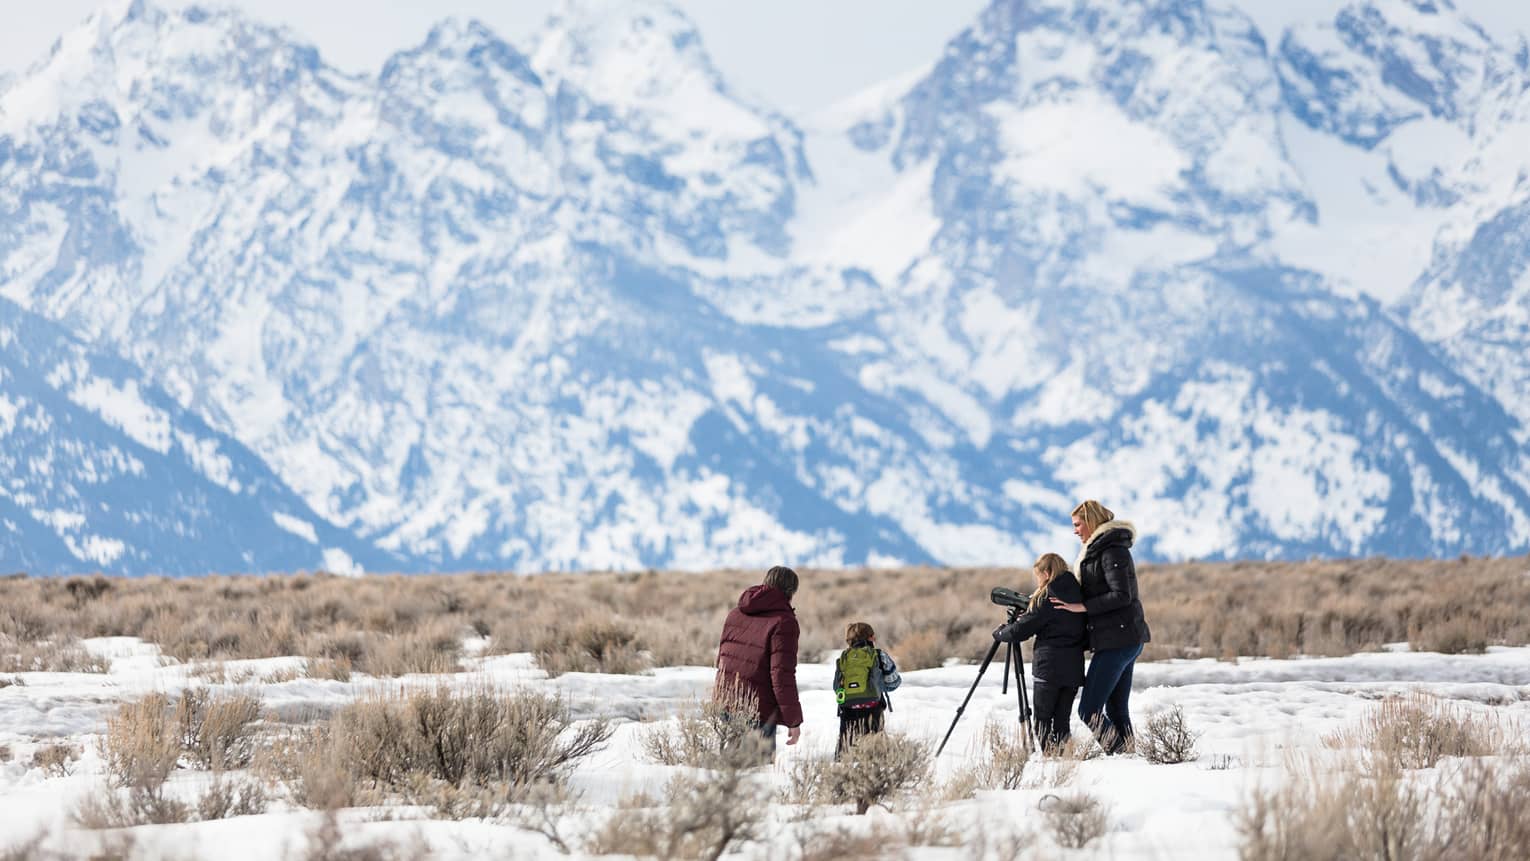 Family in snowy field with camera on tripod pointed at towering mountains